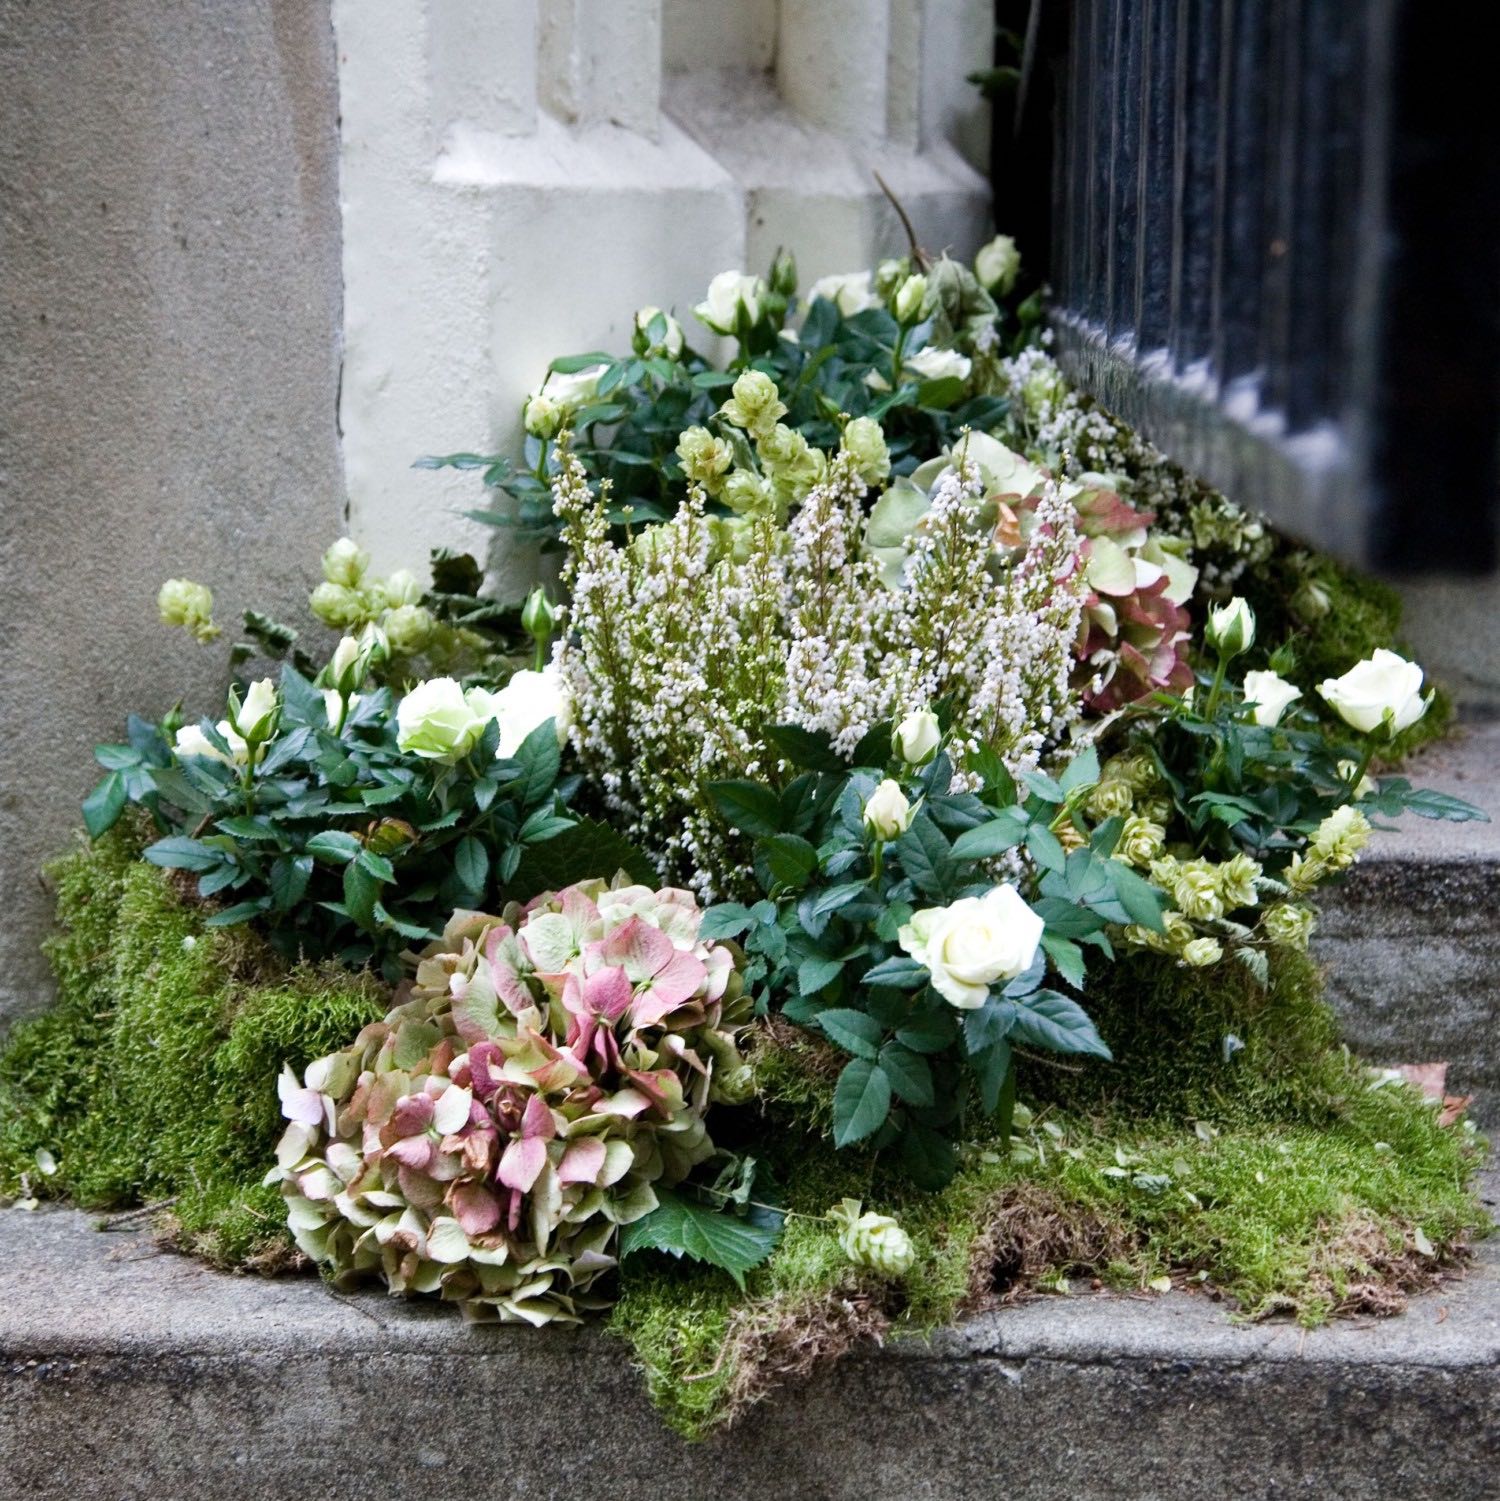 For a storybook London wedding, heather, moss, and hydrangeas were nestled upon the stone church steps.